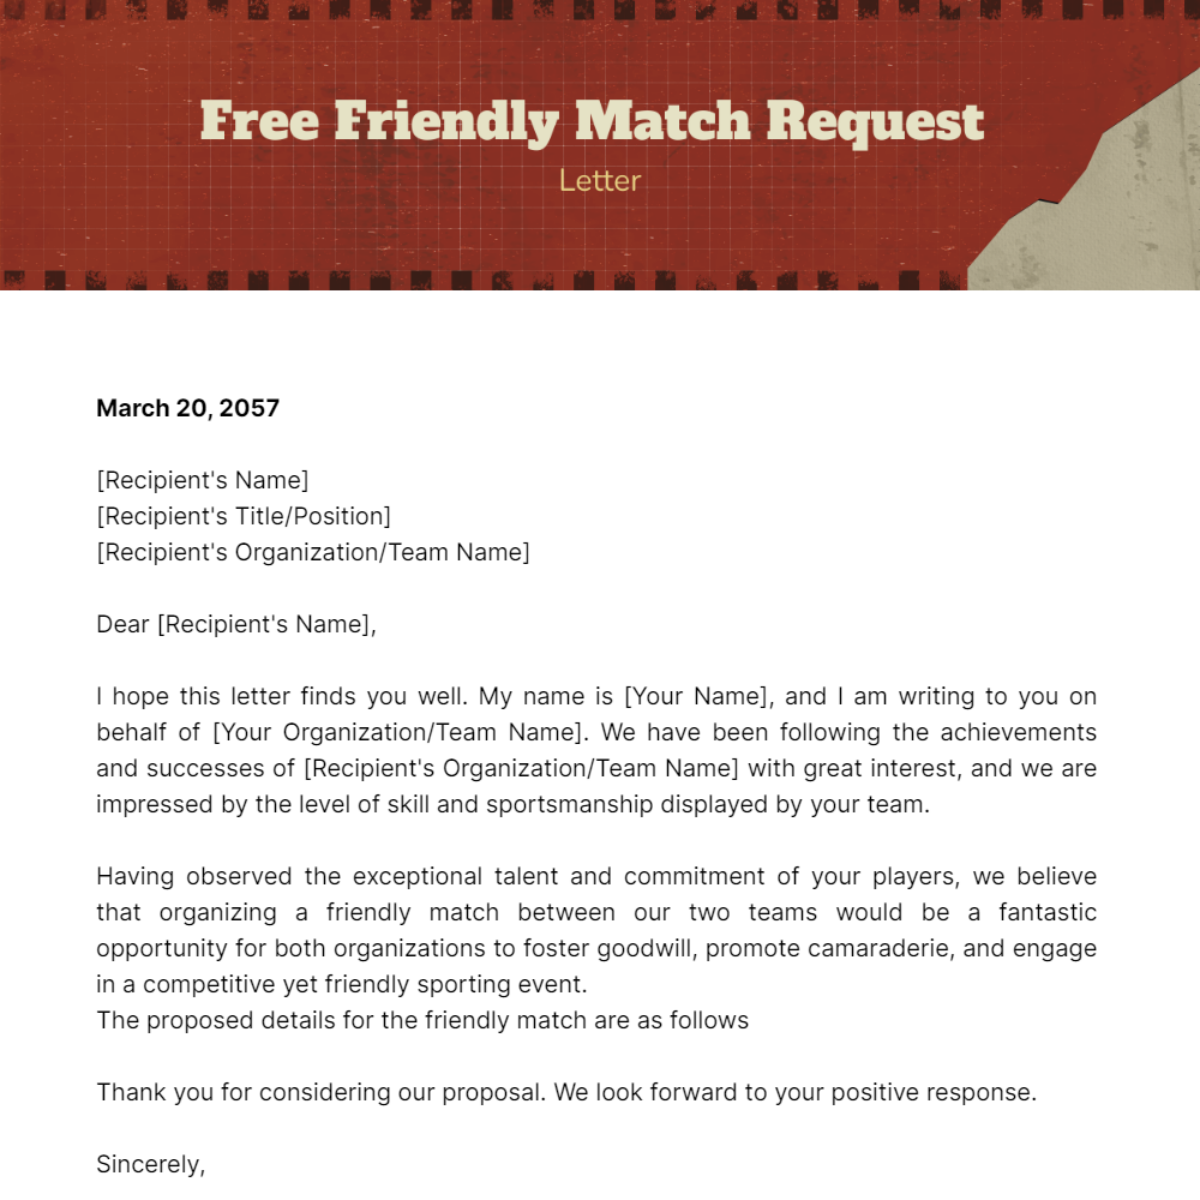 Friendly Match Request Letter Template